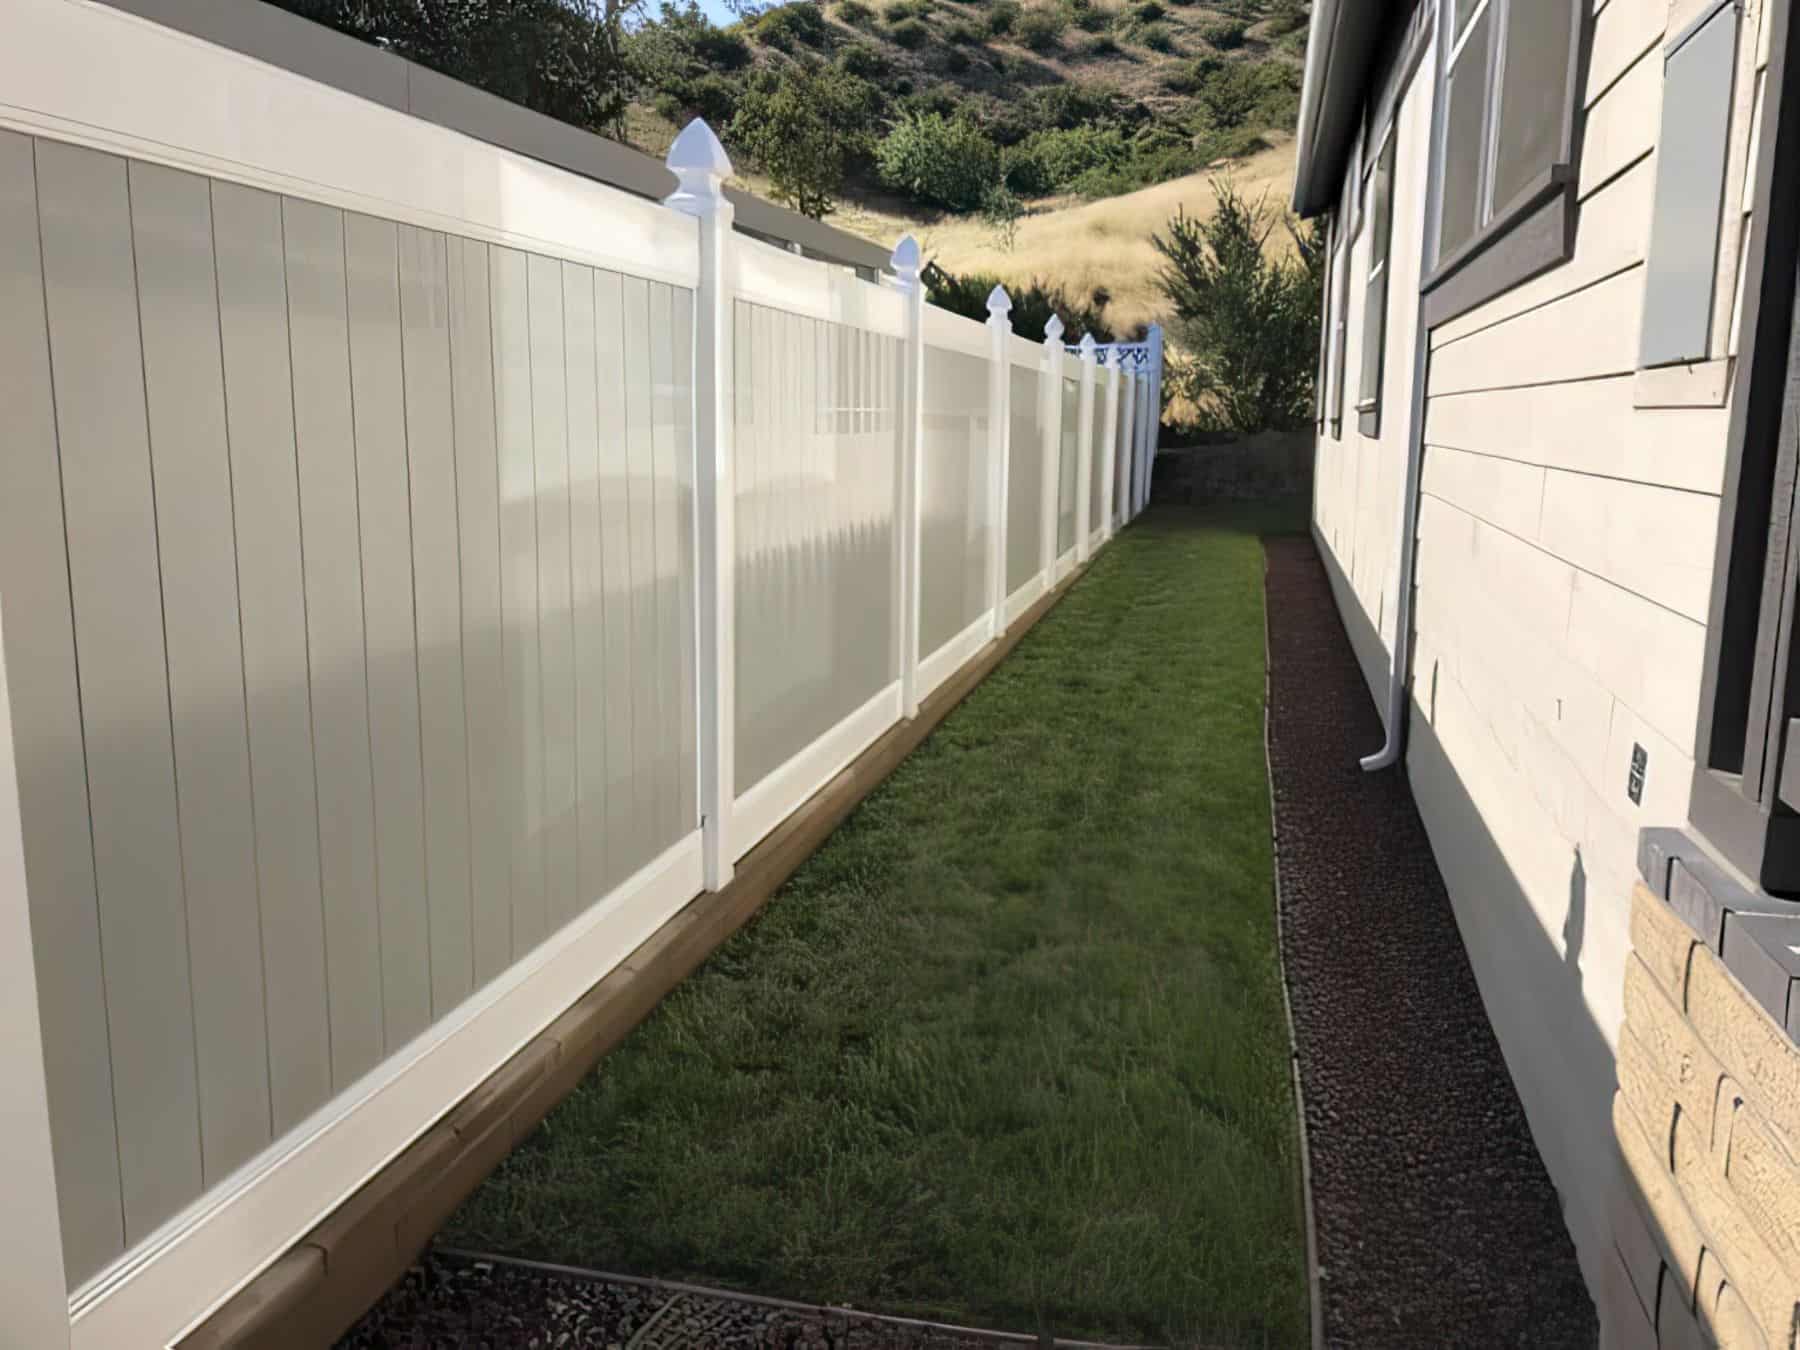 Vinyl privacy two-tone fence in front of small patch of grass within the side passage leading into the backyard.